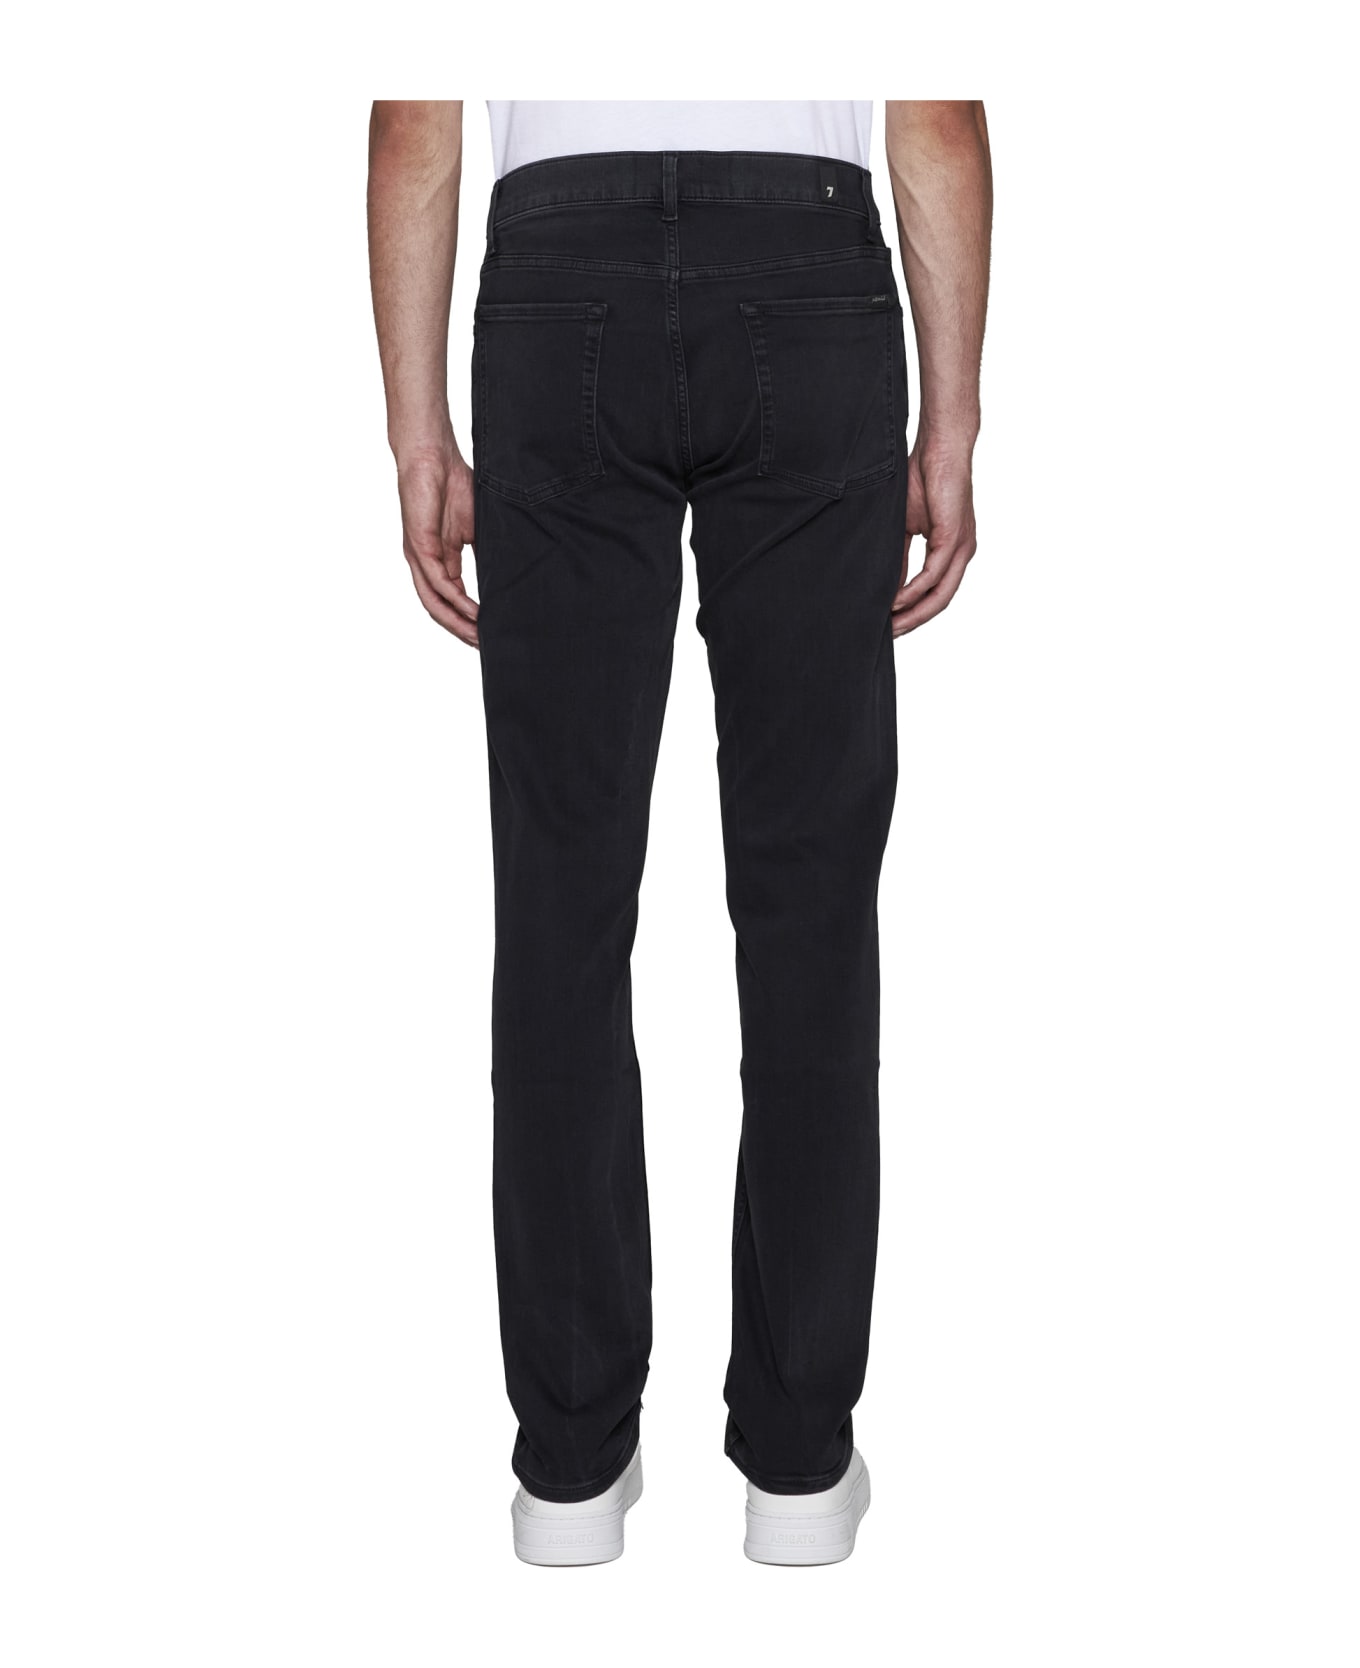 7 For All Mankind Jeans - Black